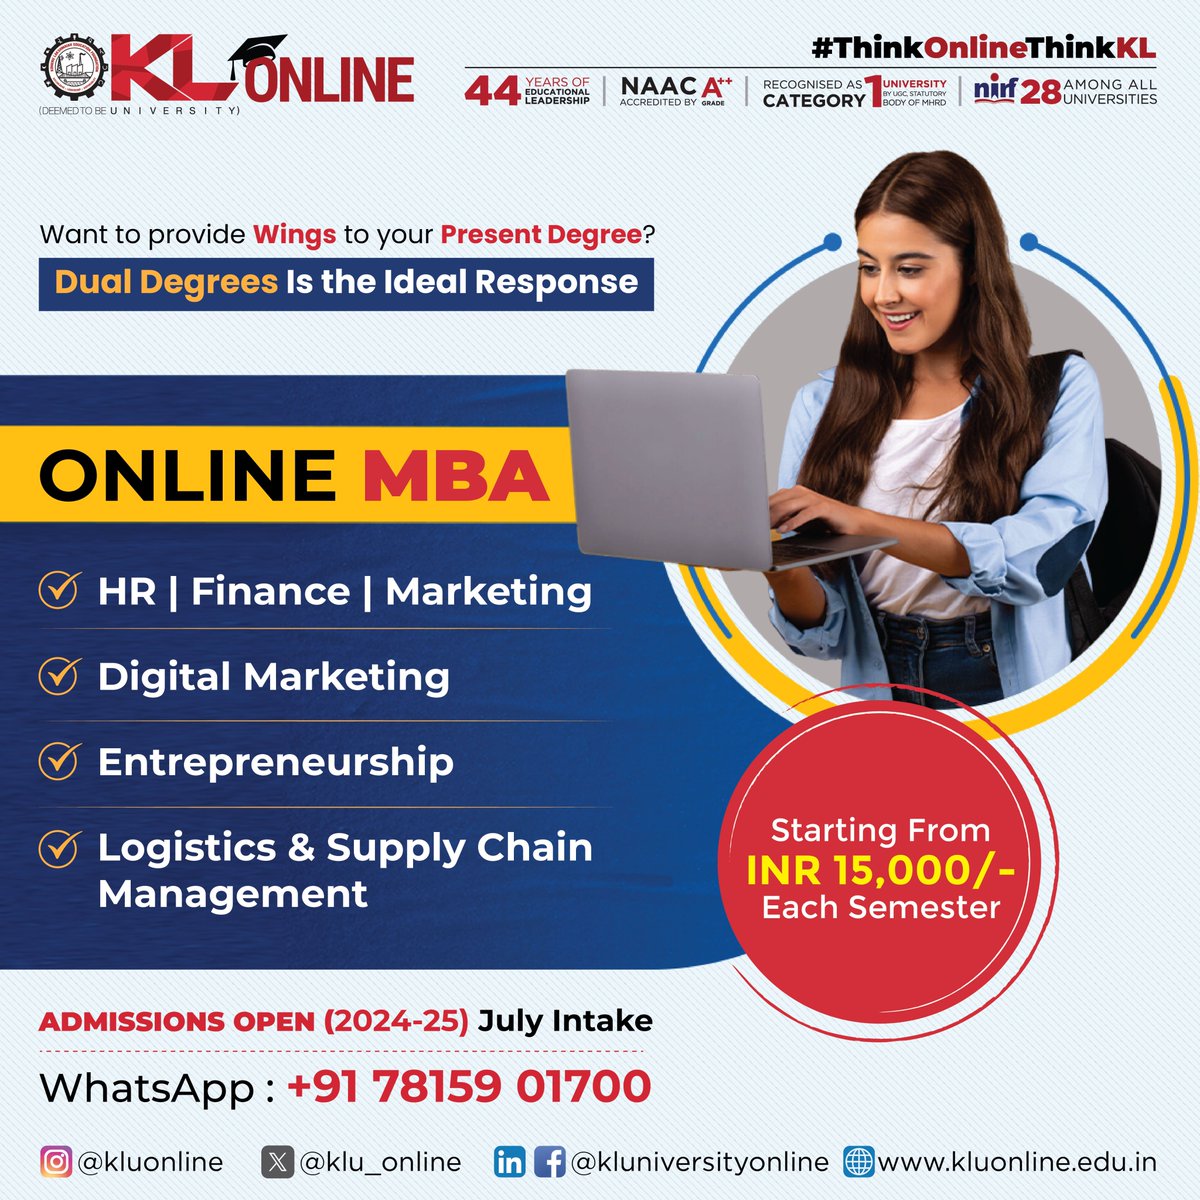 A dual degree has its benefits. One can take advantage of the advantages of two diverse fields. Enroll in an MBA program at KL Online and pave a path for better career growth.

Admissions open 2024.

#KLOnline #KLUniversity #Onlinedegree #onlinelearning #OnlineMBA #pgcourses